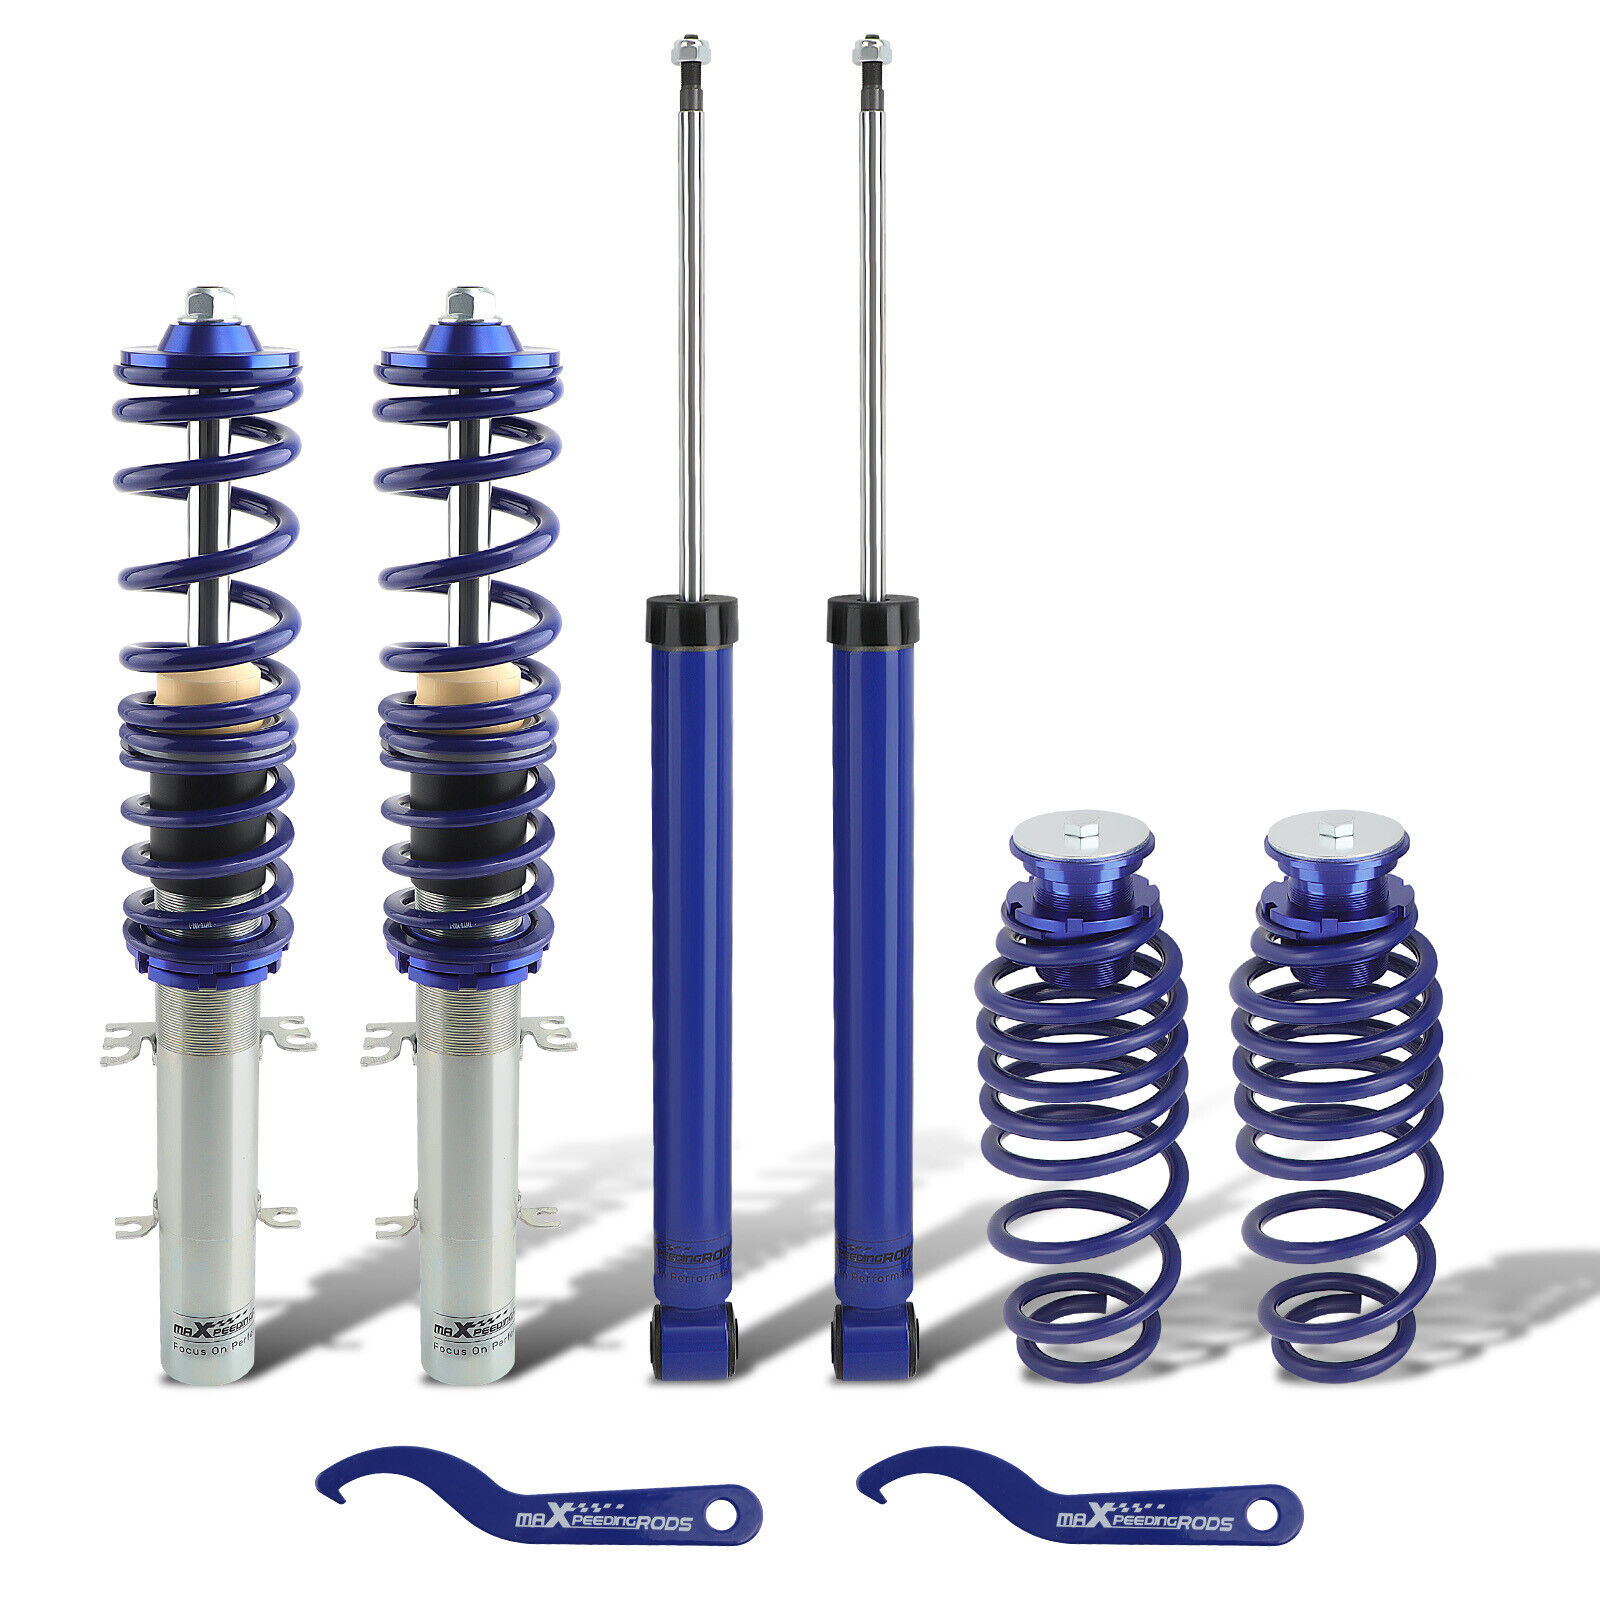 STREET COILOVER KIT FITS FOR VW MK4 GOLF / GTI / JETTA / NEW BEETLE NEW 99-05